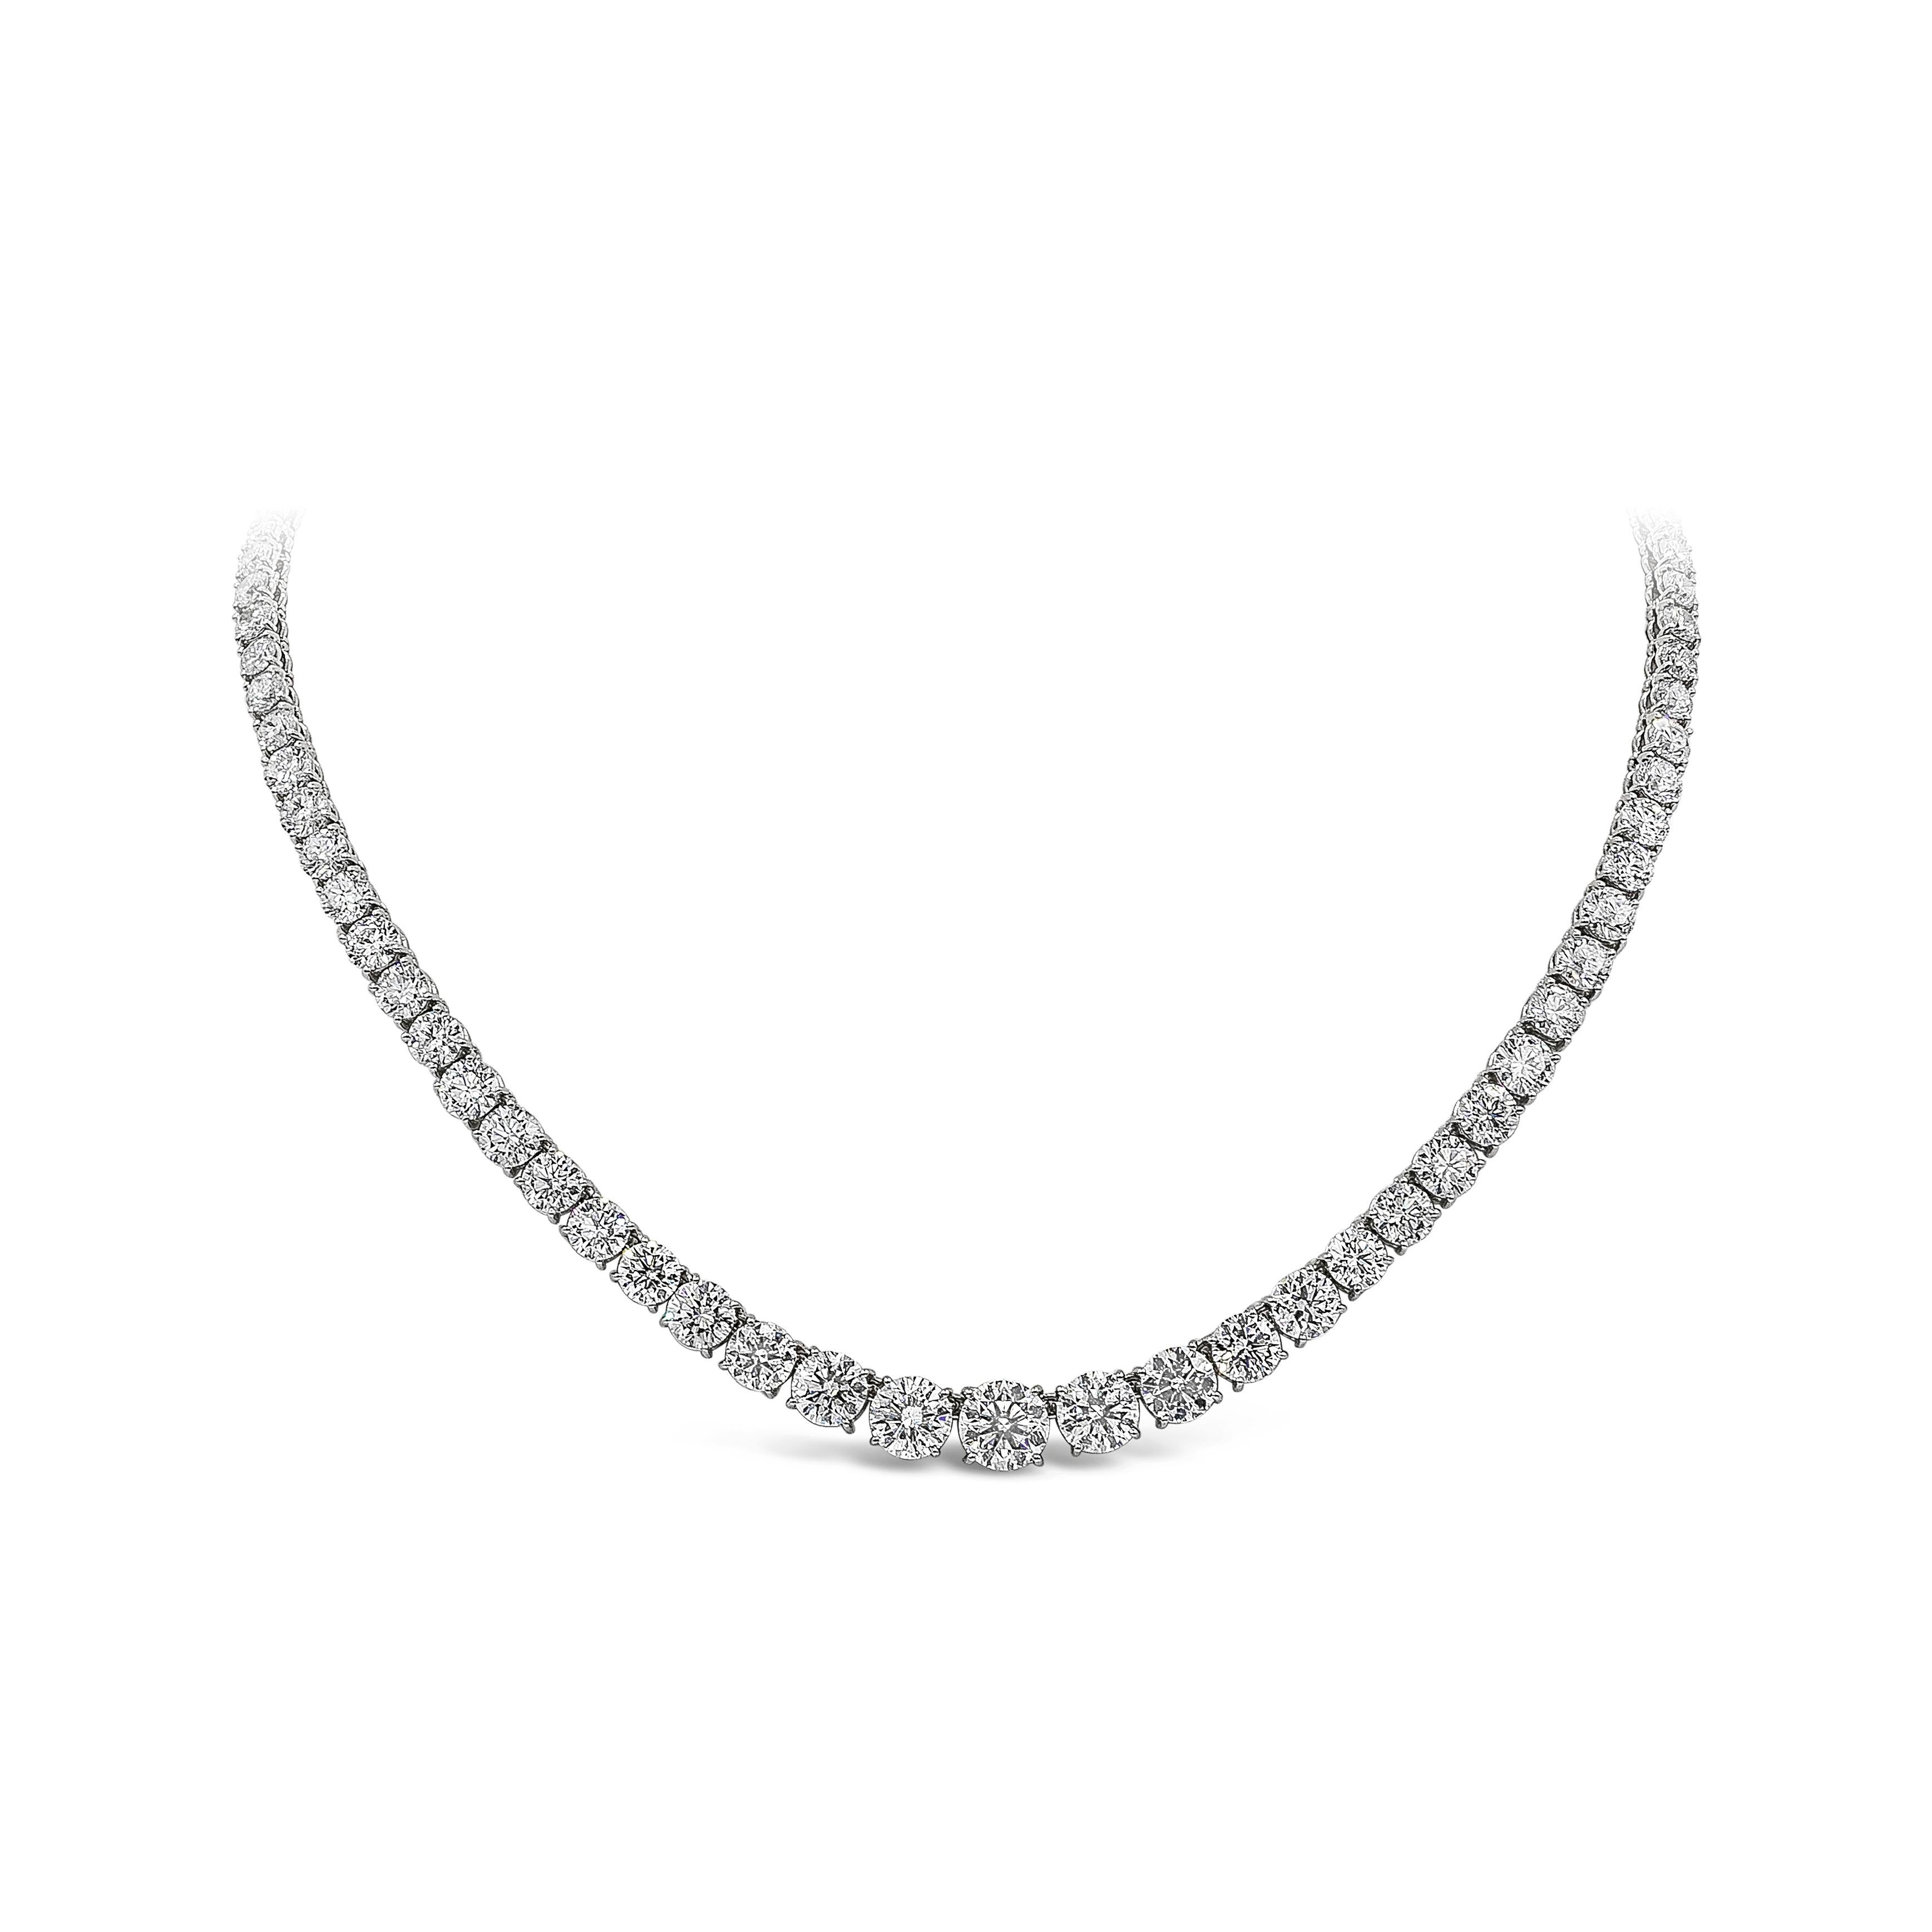 A brilliant and spectacular piece of jewelry showcasing a row of round brilliant diamonds that elegantly graduate in size as it reaches the middle. Diamonds weigh 30.69 carats total and are approximately F color, SI clarity. Finished with a diamond